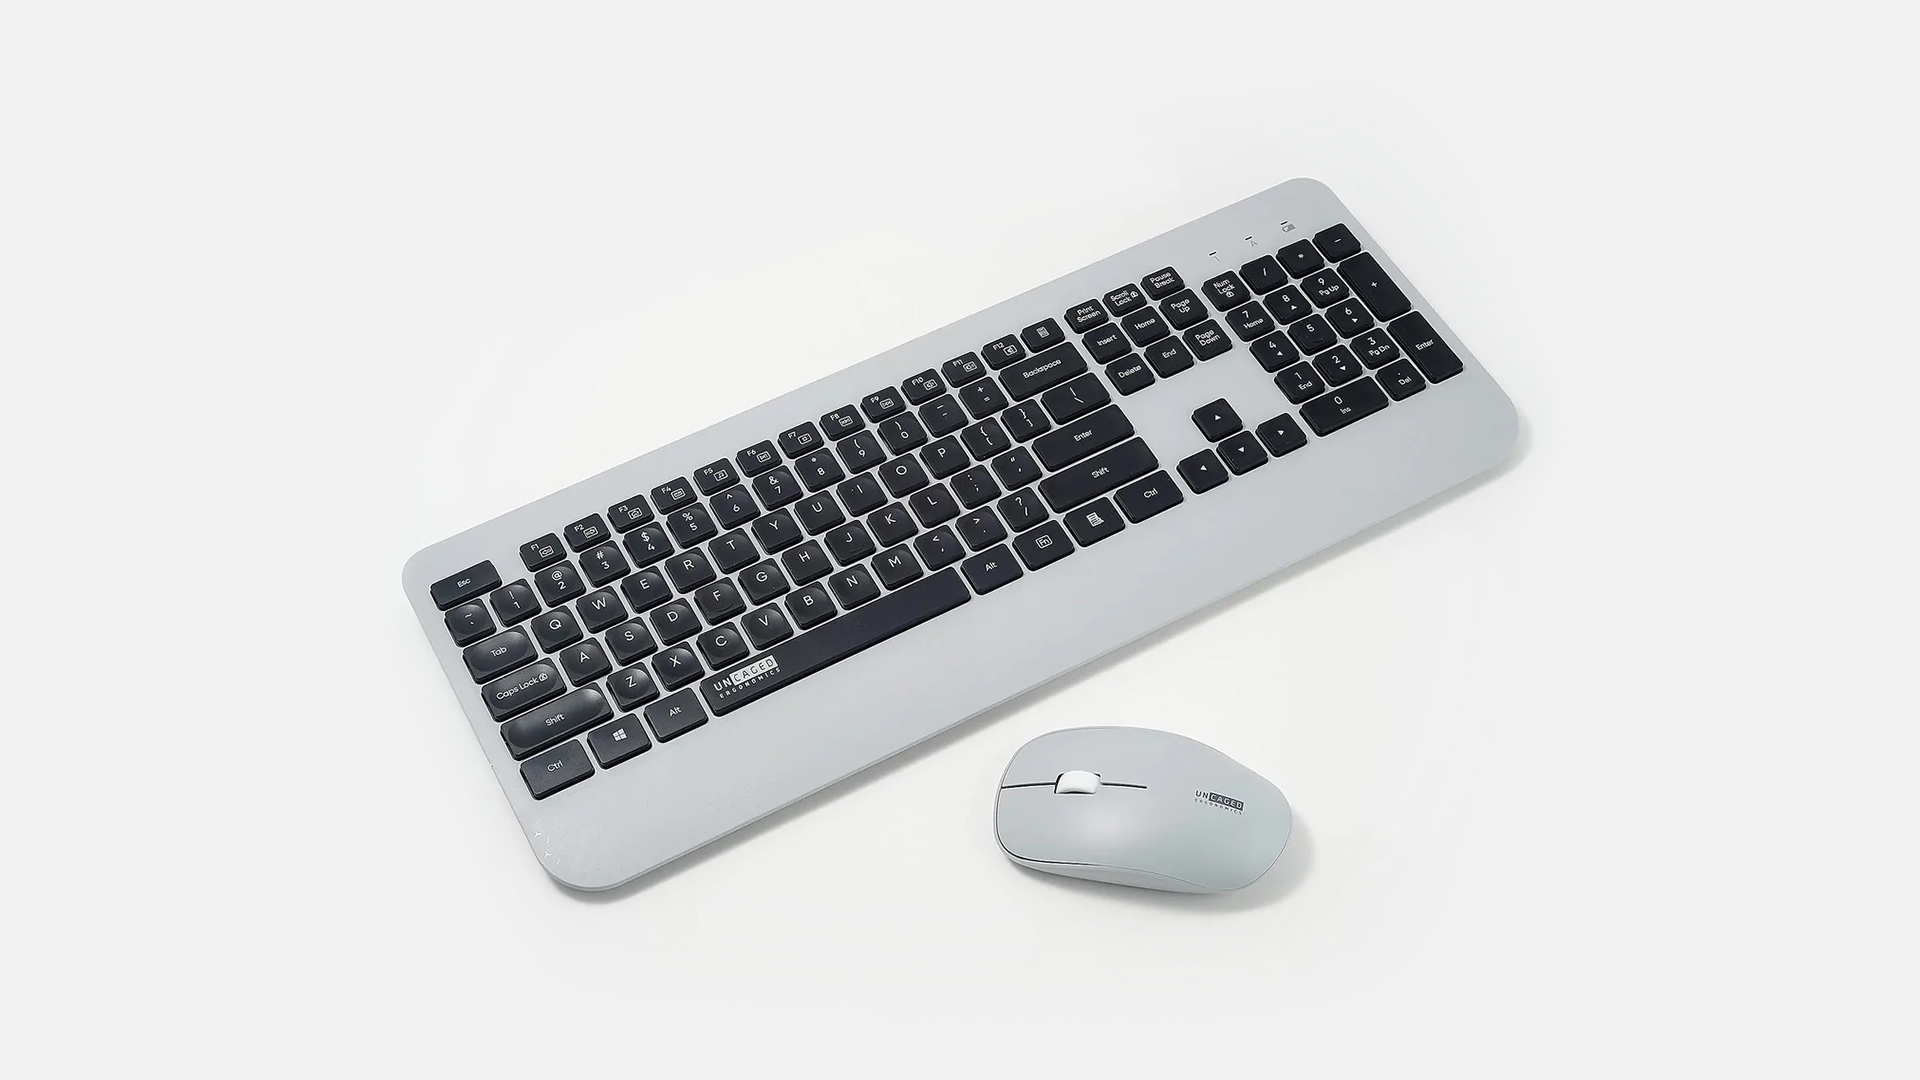 Wireless Keyboard & Mouse Antimicrobial¹ Combo Set